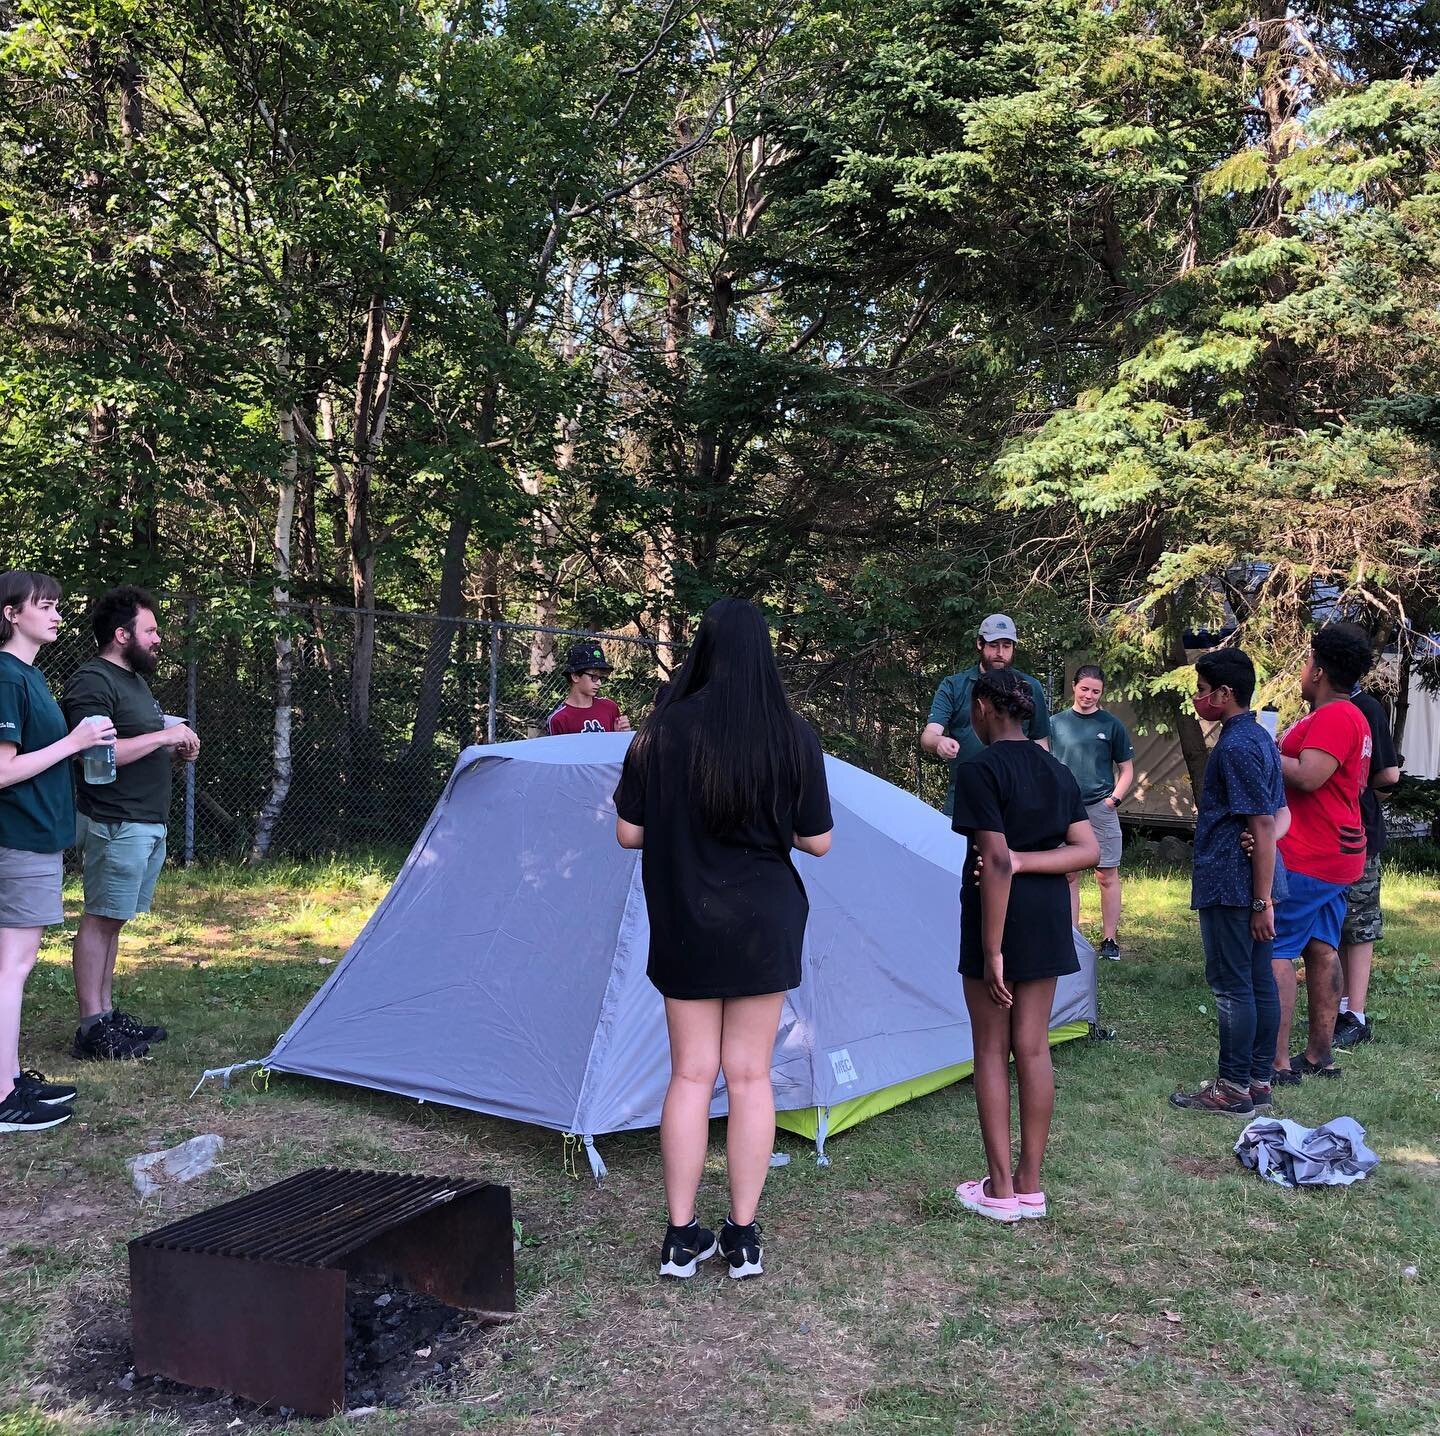 Thank you to @parks.canada Learn-to-Camp for a great wilderness training overnight! We learned how to set up a tent, fire skills, canoe training, and more! We can&rsquo;t wait for our wilderness trips this summer!